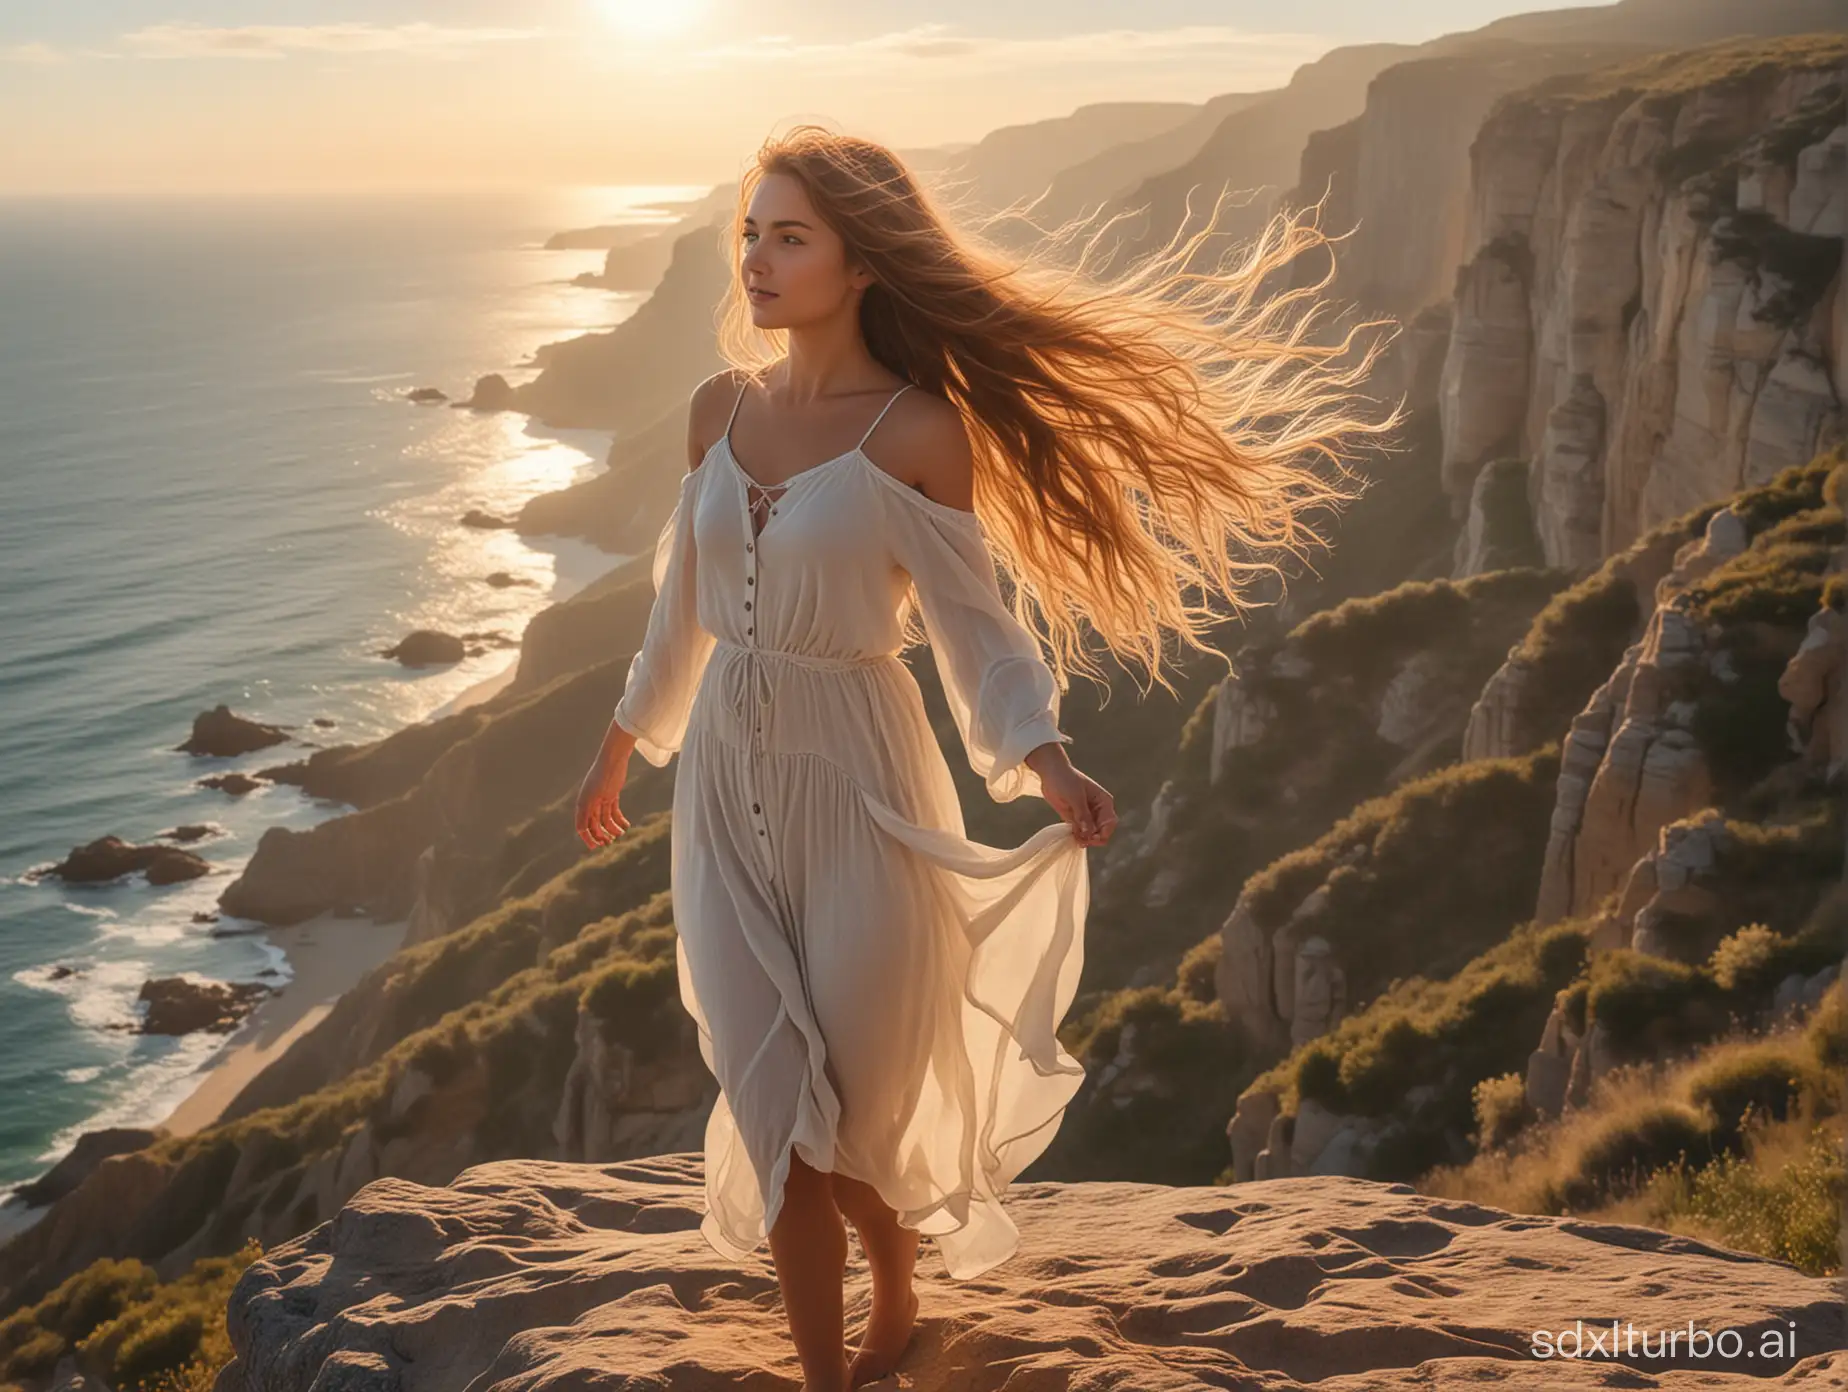 A young woman stands on a cliff overlooking a serene, sun-kissed landscape. Her hair dances in the gentle breeze, and her eyes reflect the beauty of the world before her. Full body